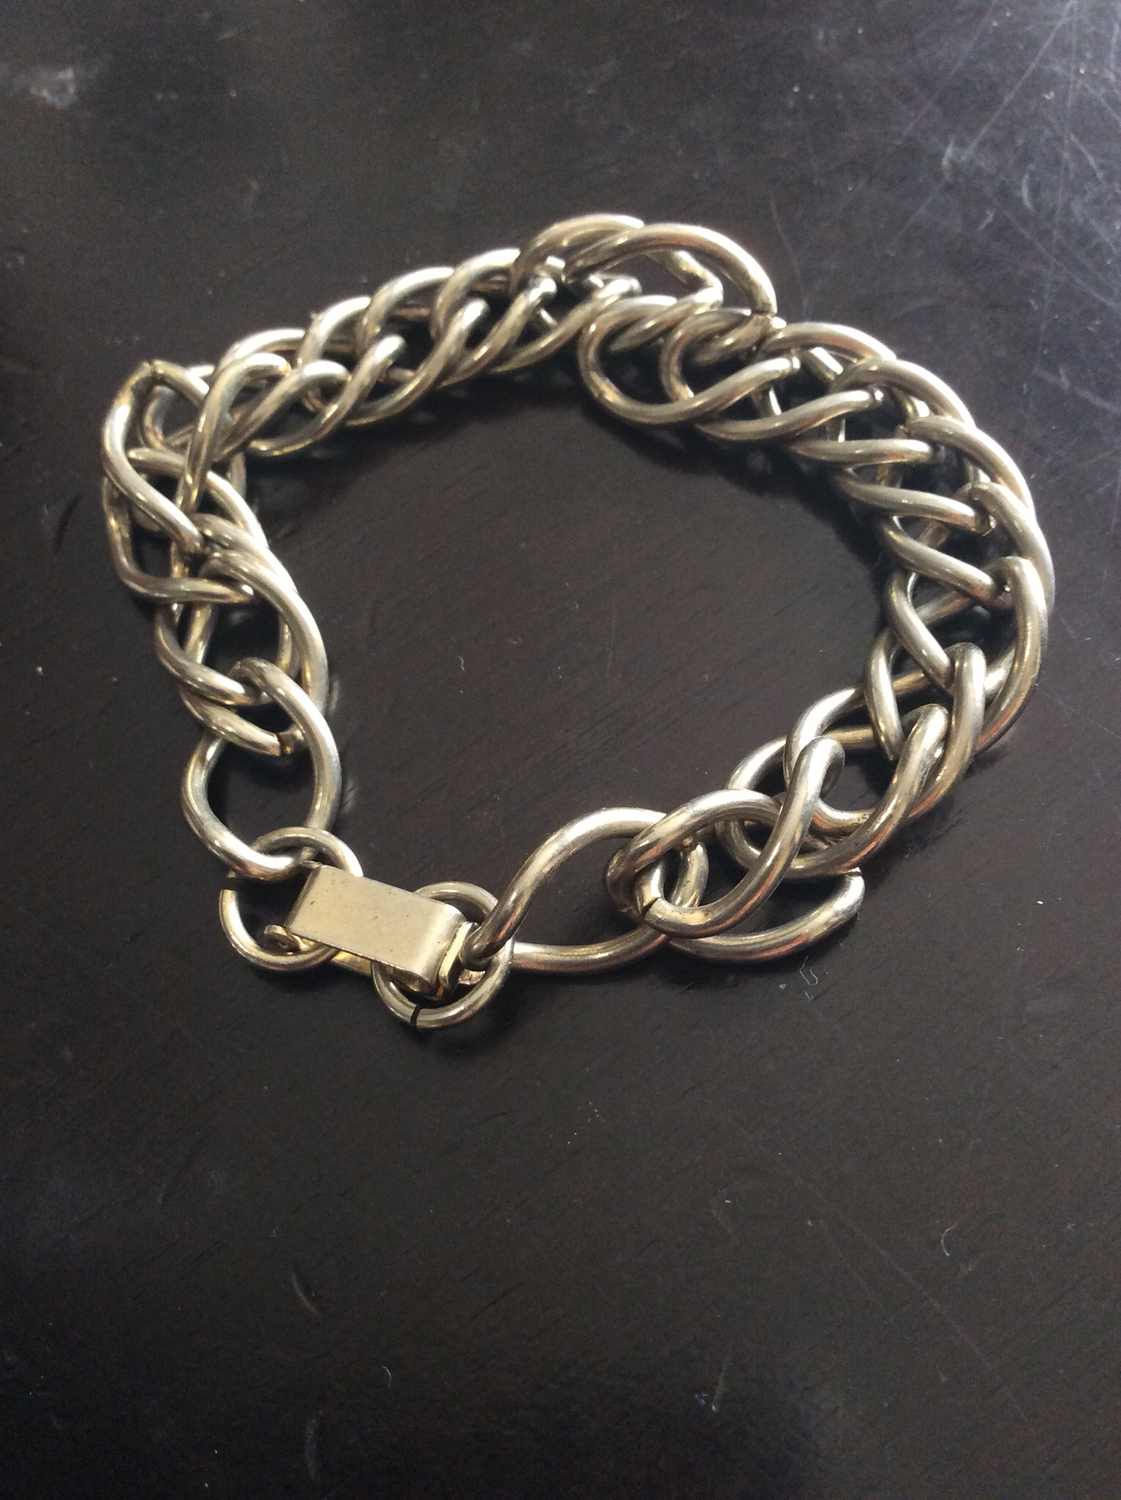 To charge enchanted tabernacles and spirit Talismans, place this bracelet with such in a box, bag, basket, etc 